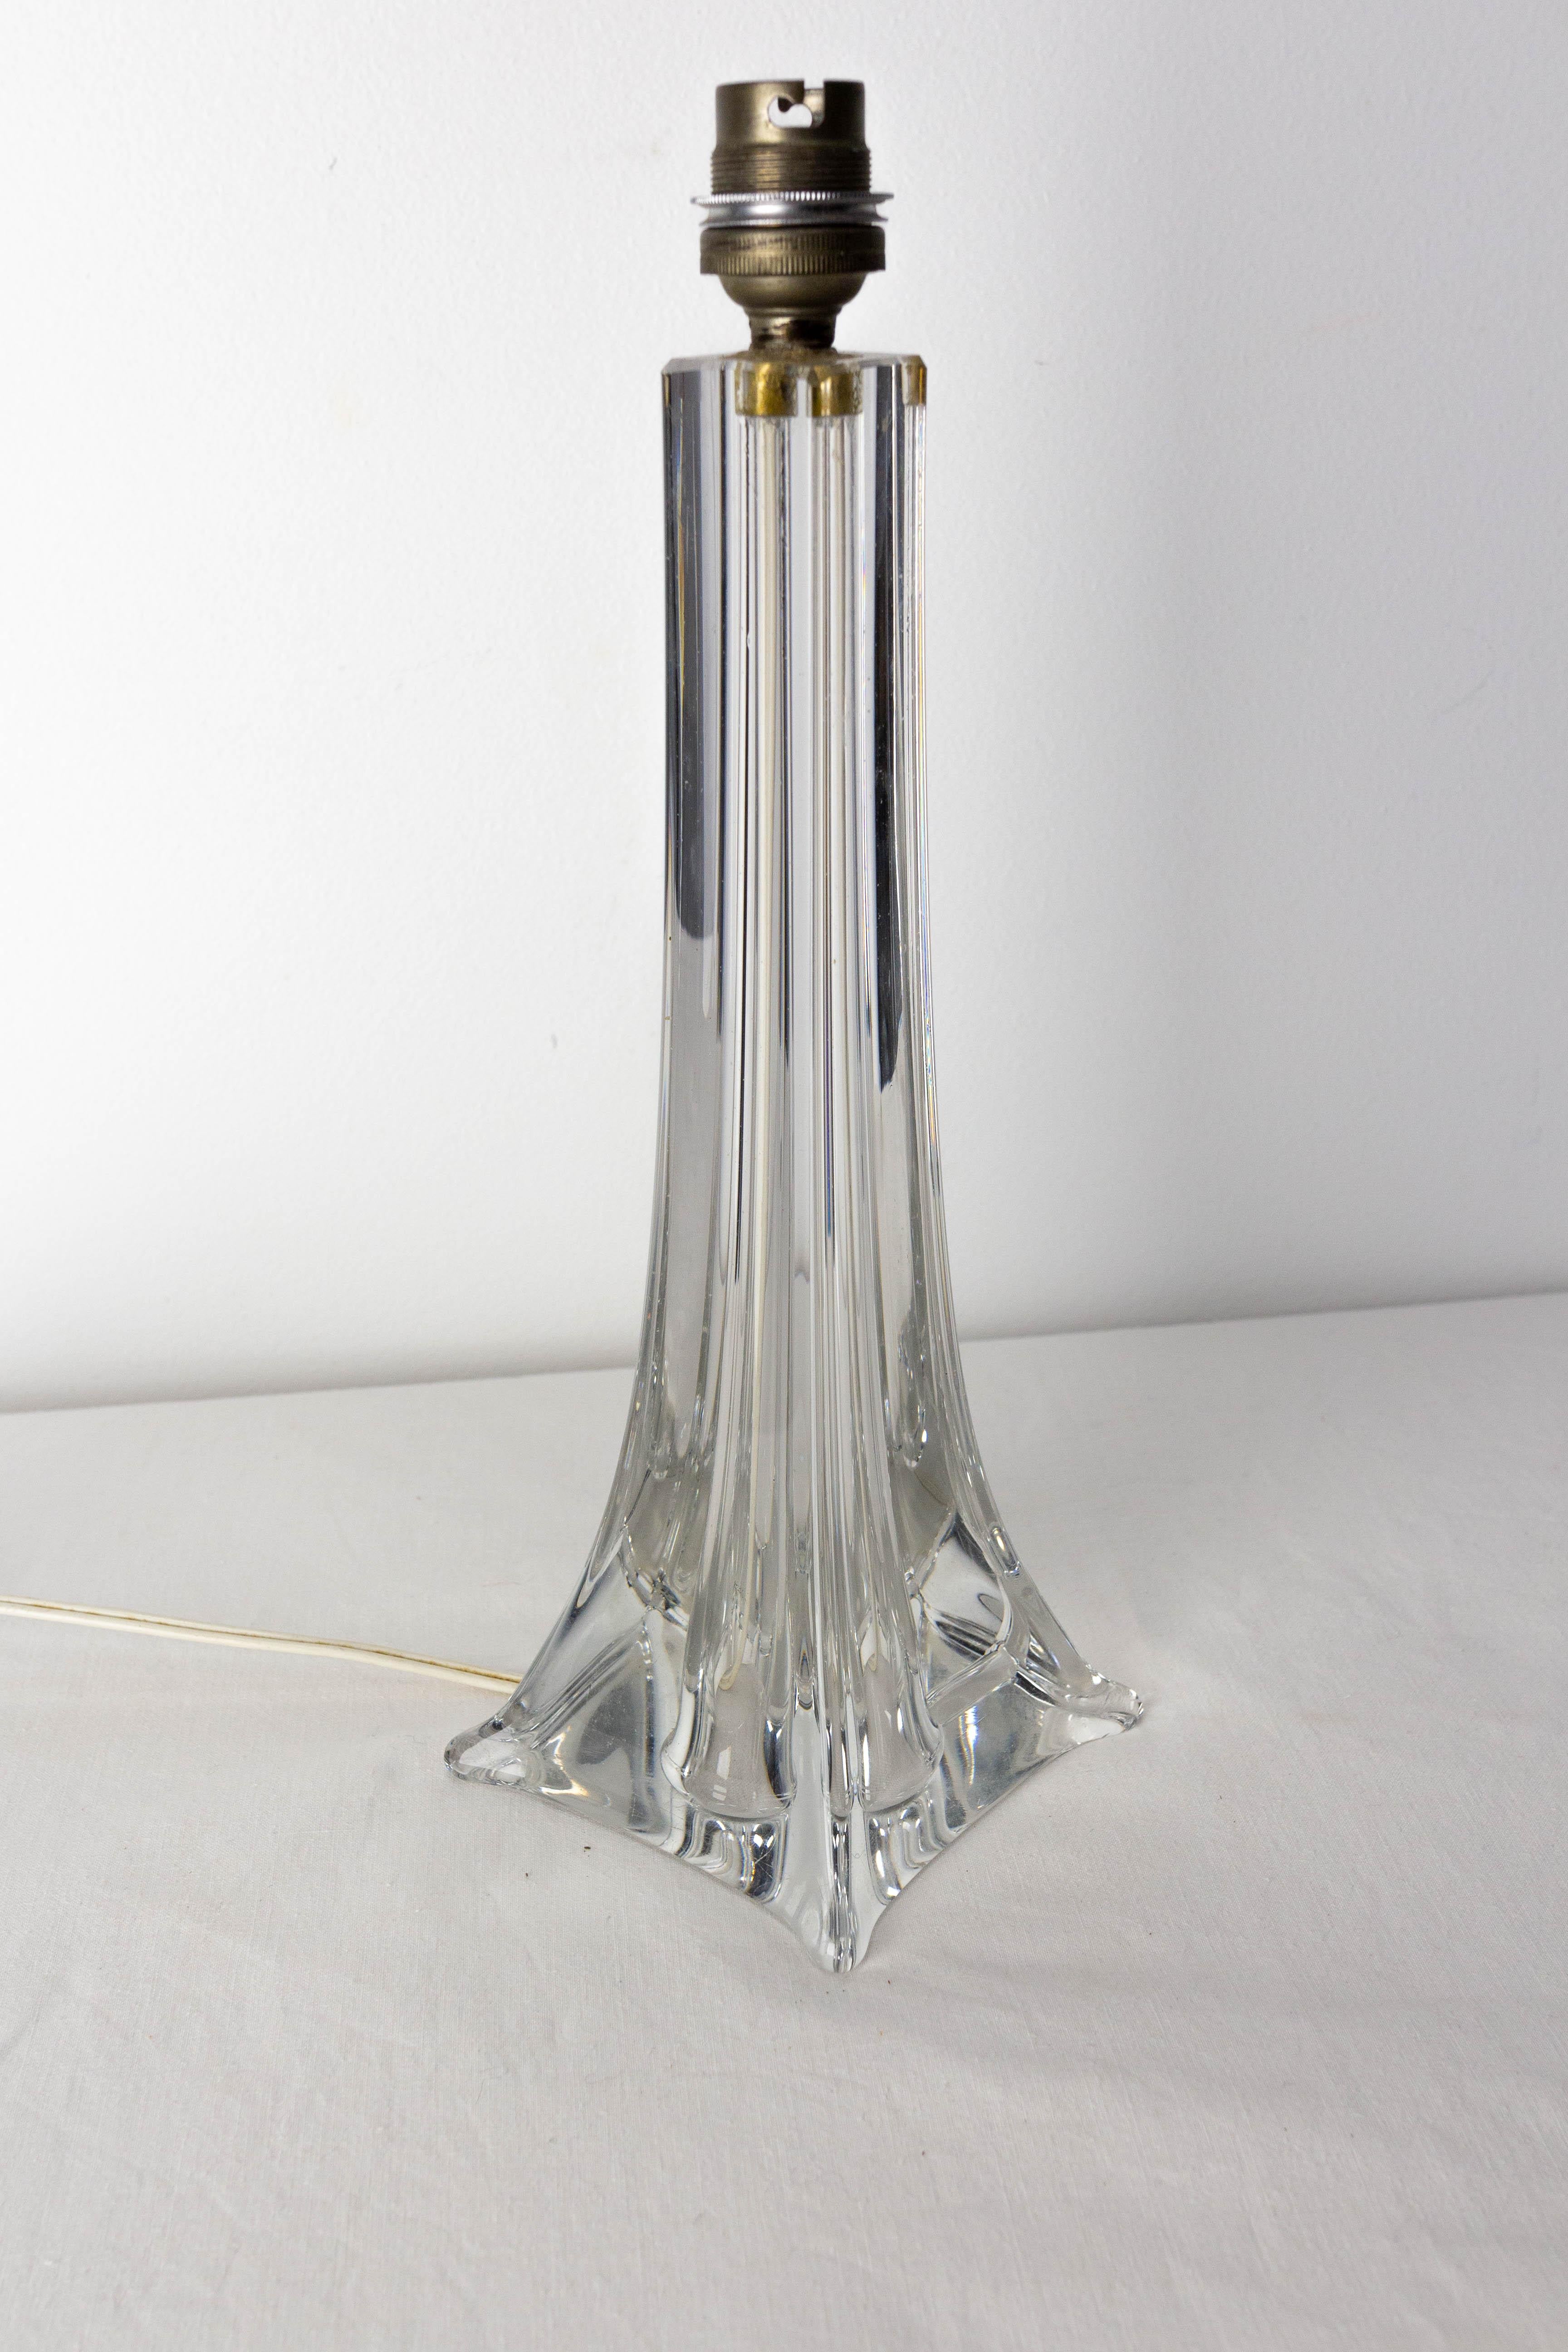 Table lamp in Saint Louis Crystal
French mid-century
The Compagnie des Cristalleries de Saint-Louis is a French crystal manufacture that produces pieces in the fields of decoration, table arts, lighting and furniture. Founded in 1586 in the valley